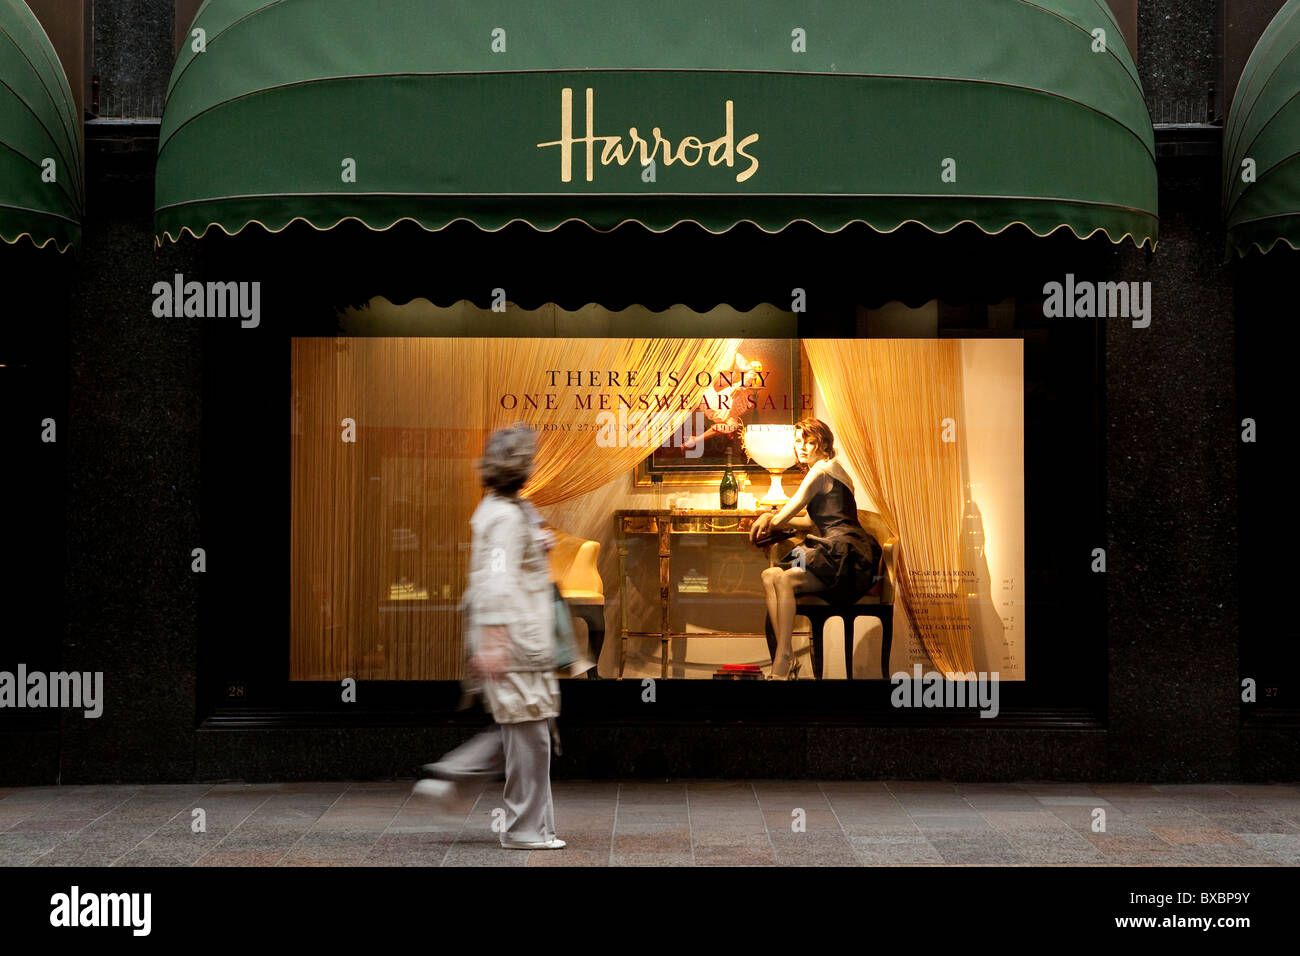 Harrods department store in London, England, United Kingdom, Europe Stock Photo